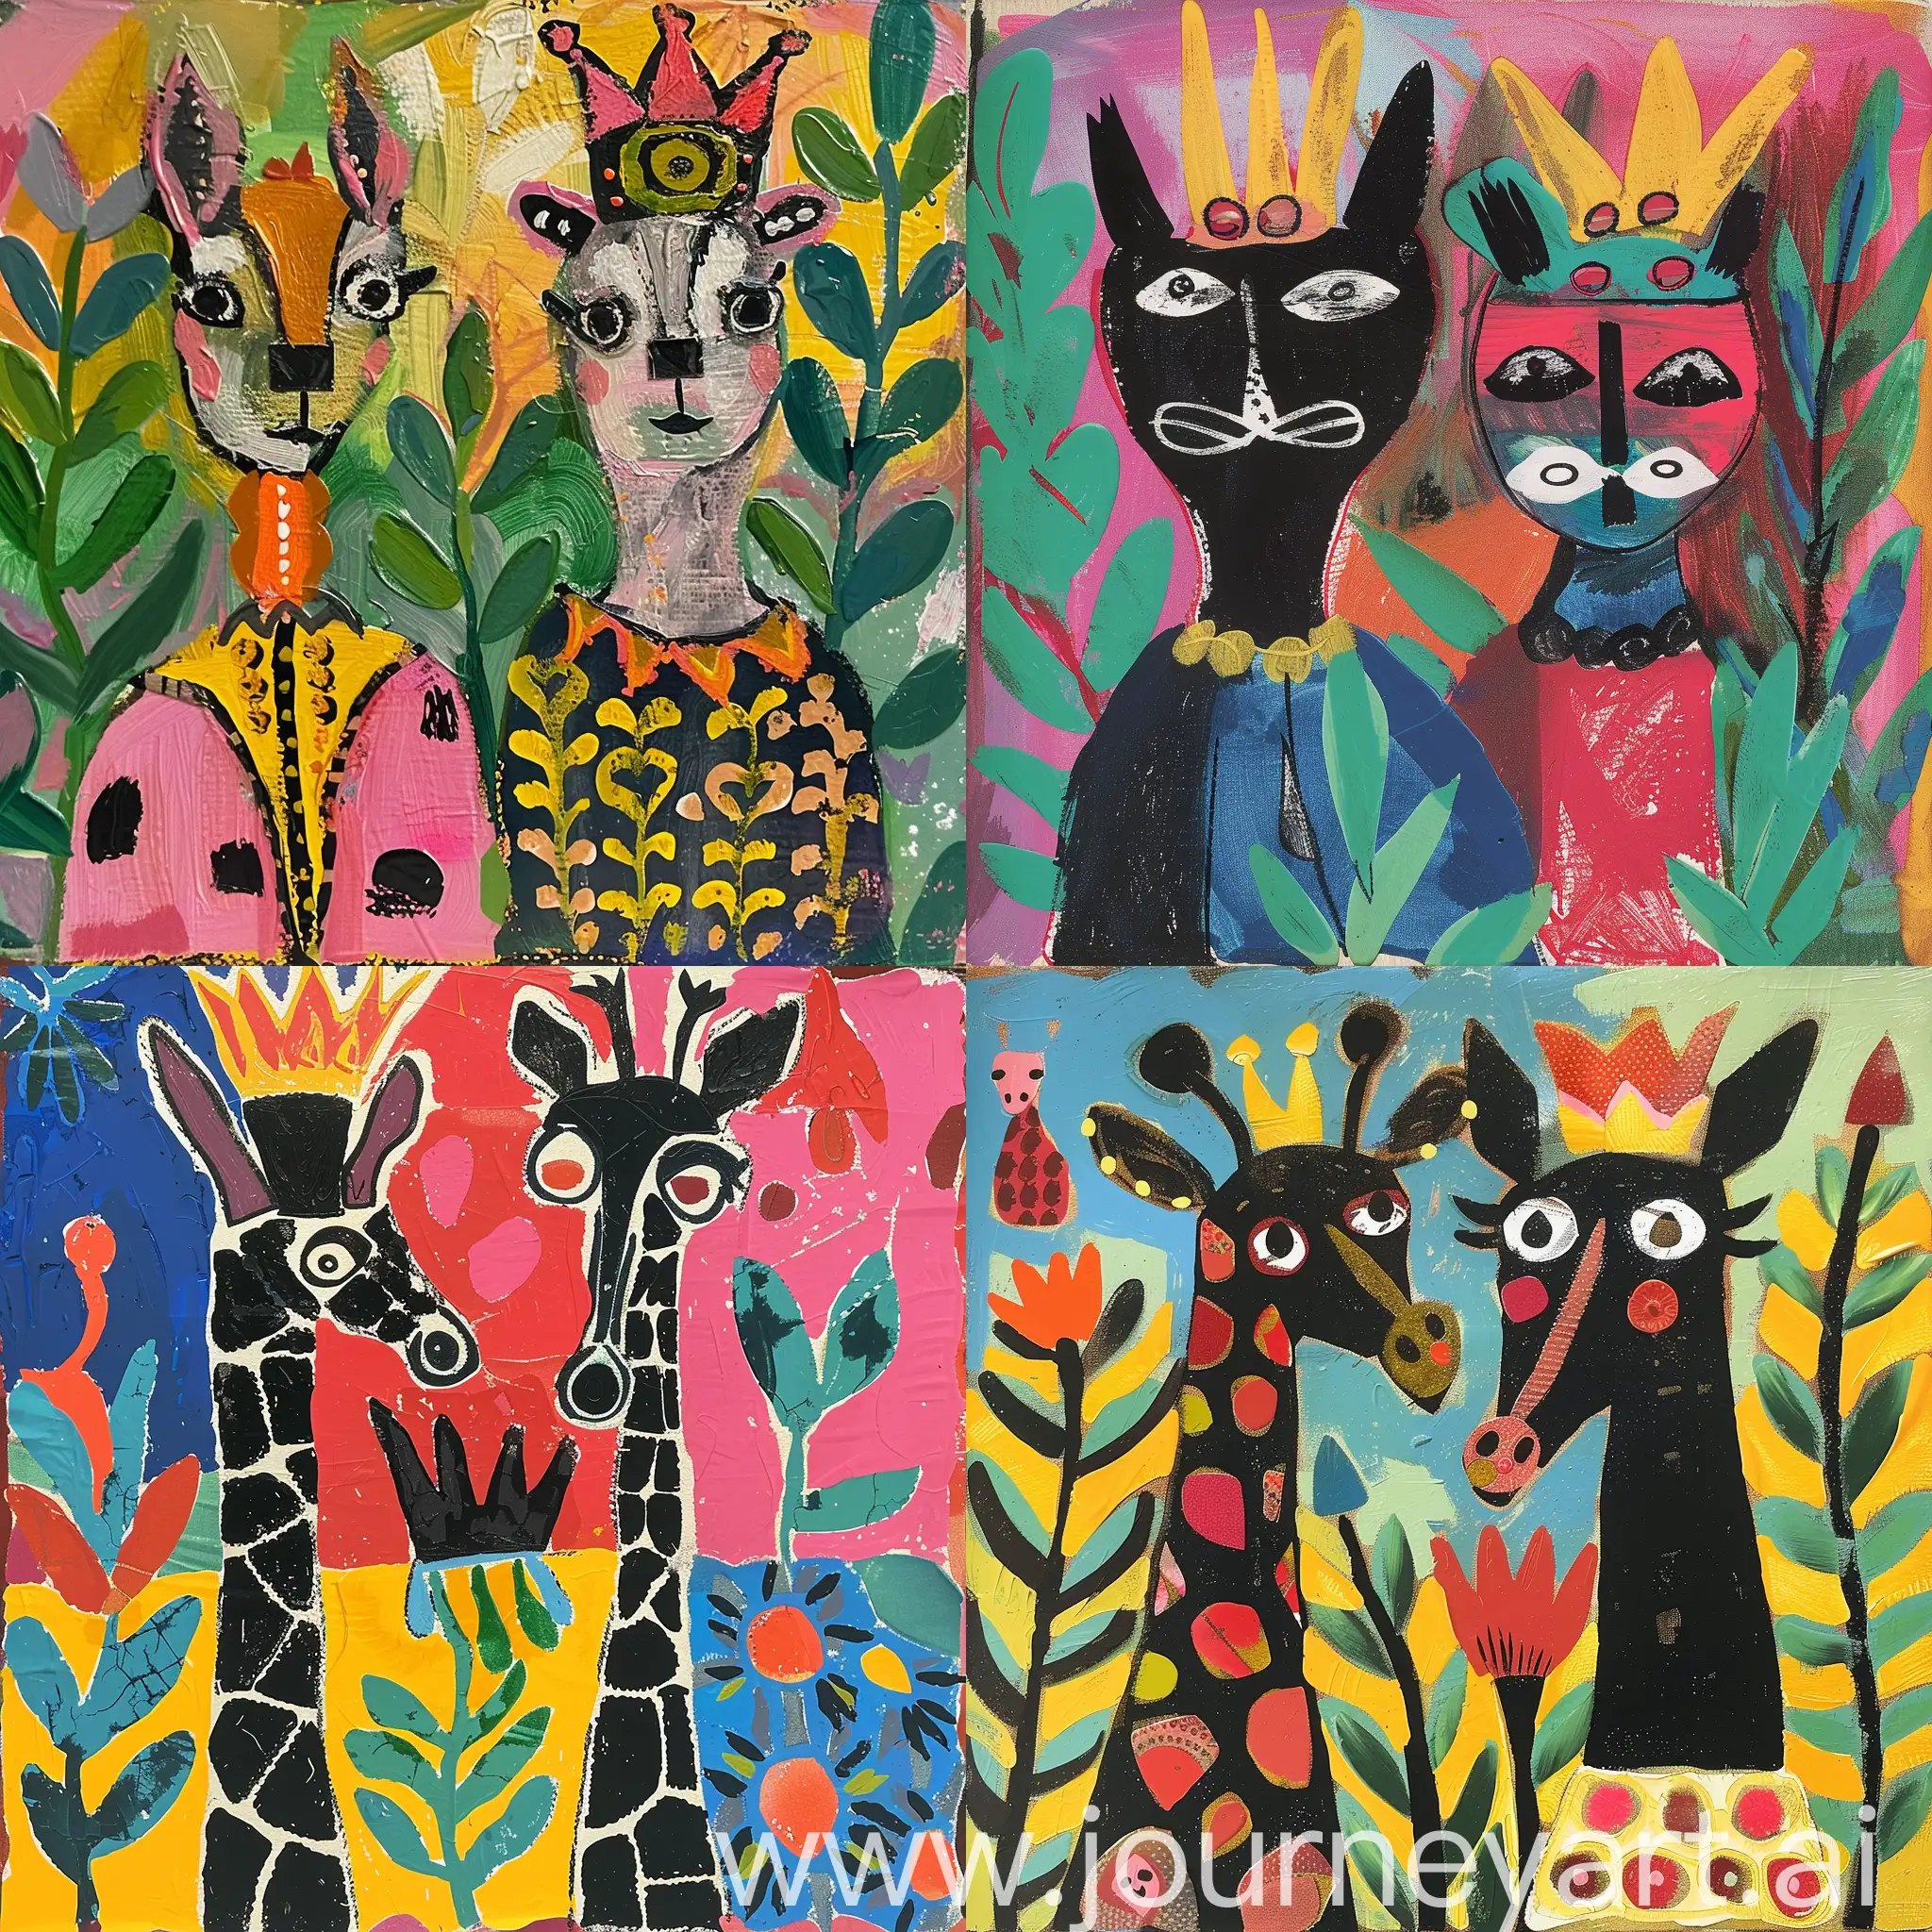 Colorful-Matisse-Style-Animal-King-and-Queen-Artwork